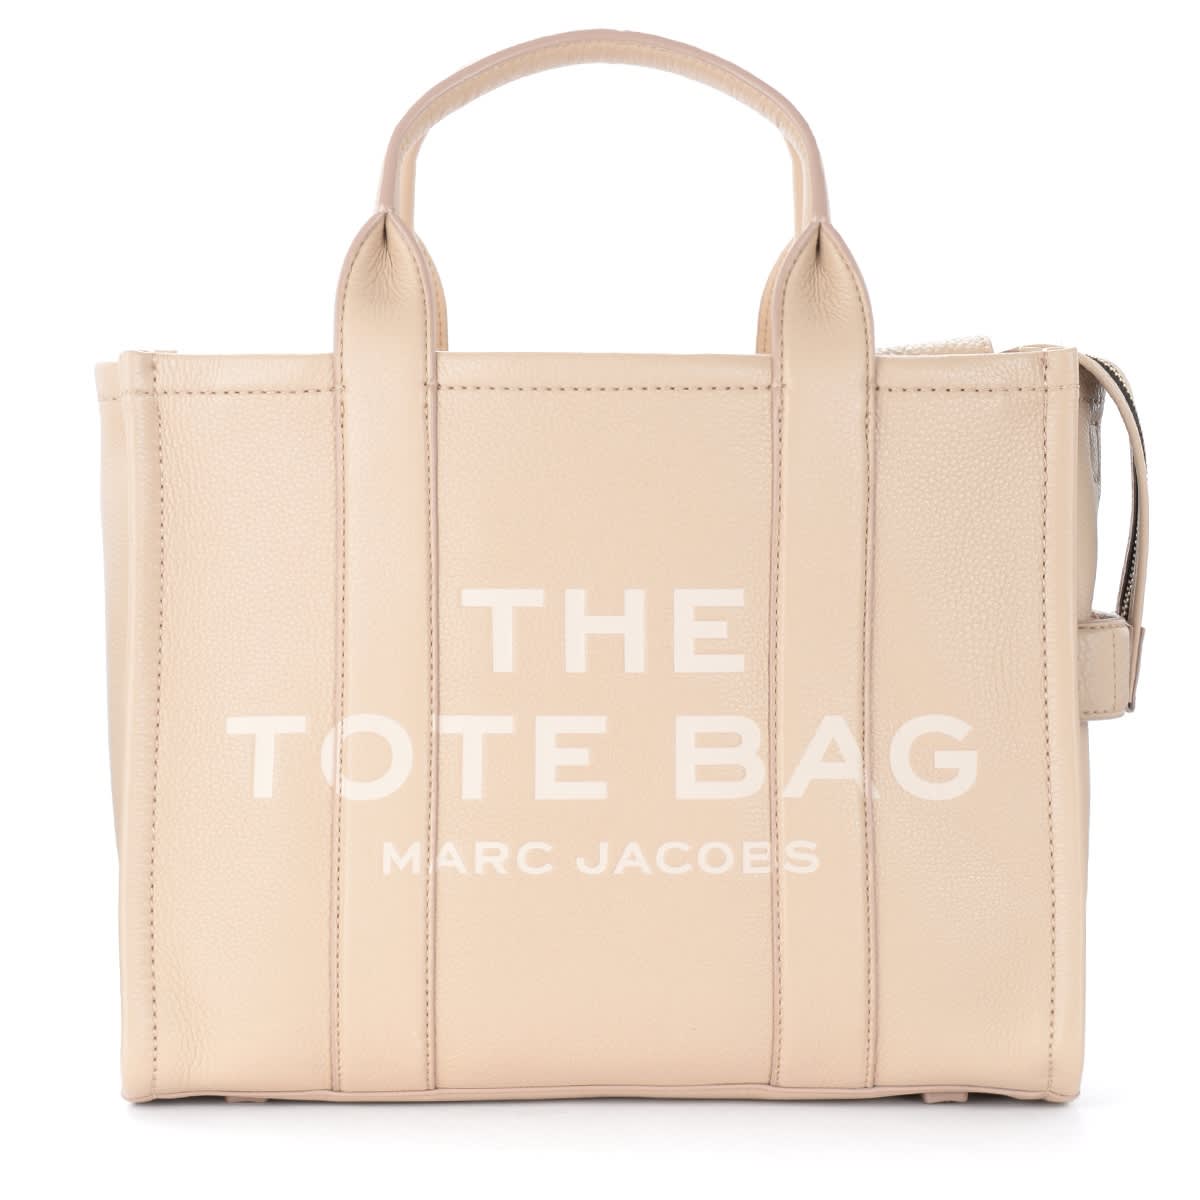 The Marc Jacobs The Leather Small Traveler Tote Bag Beige